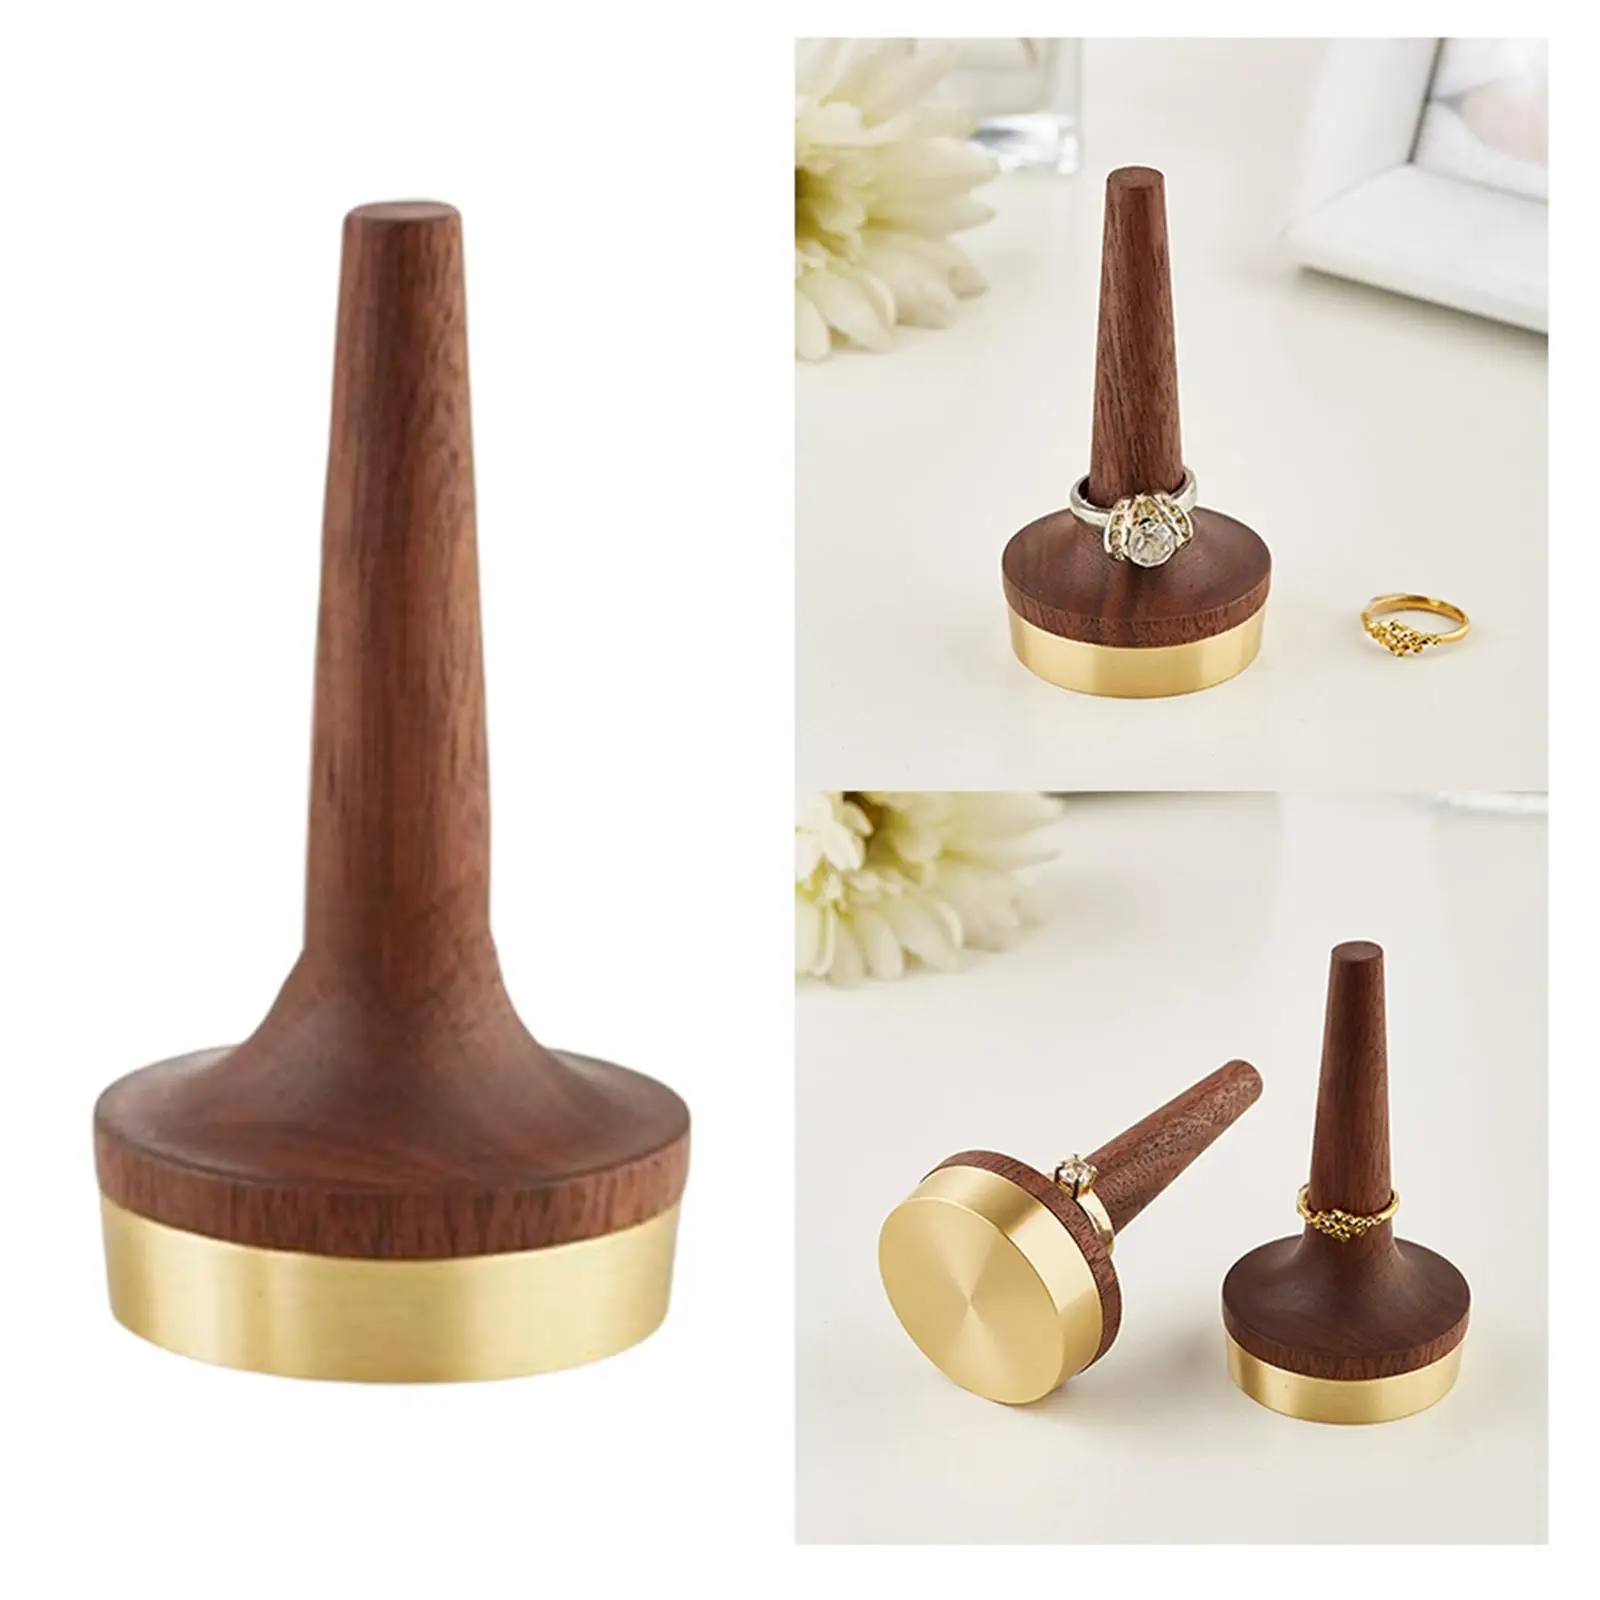 Cone Shape Display for Jewelry Showcase Display Stand for Jewelry /Wedding